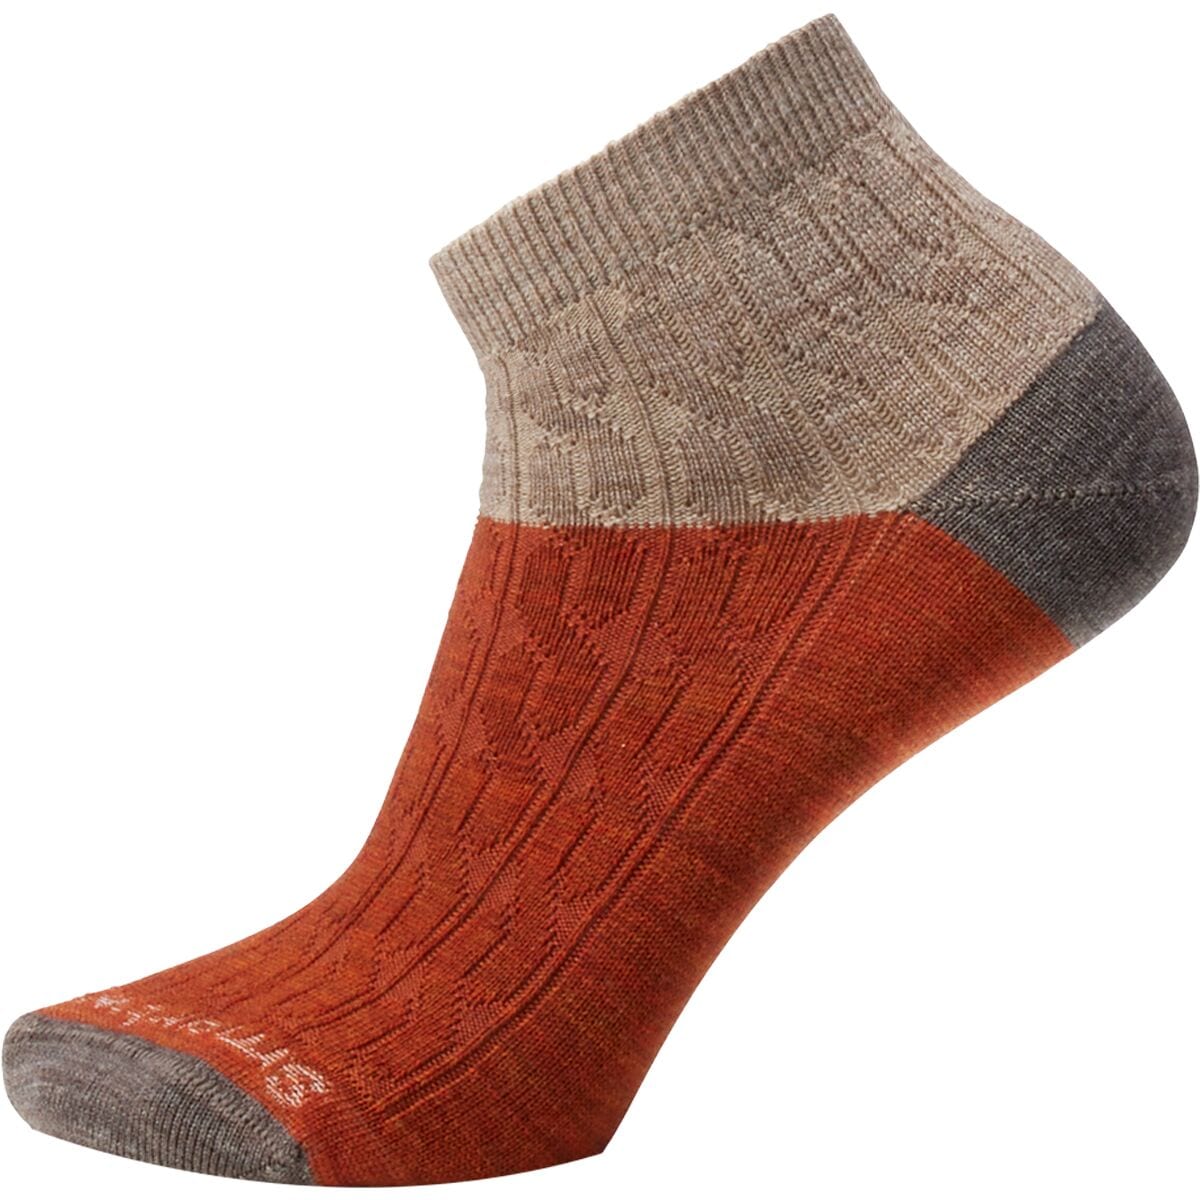 Smartwool Everyday Cable Ankle Boot Sock - Women's